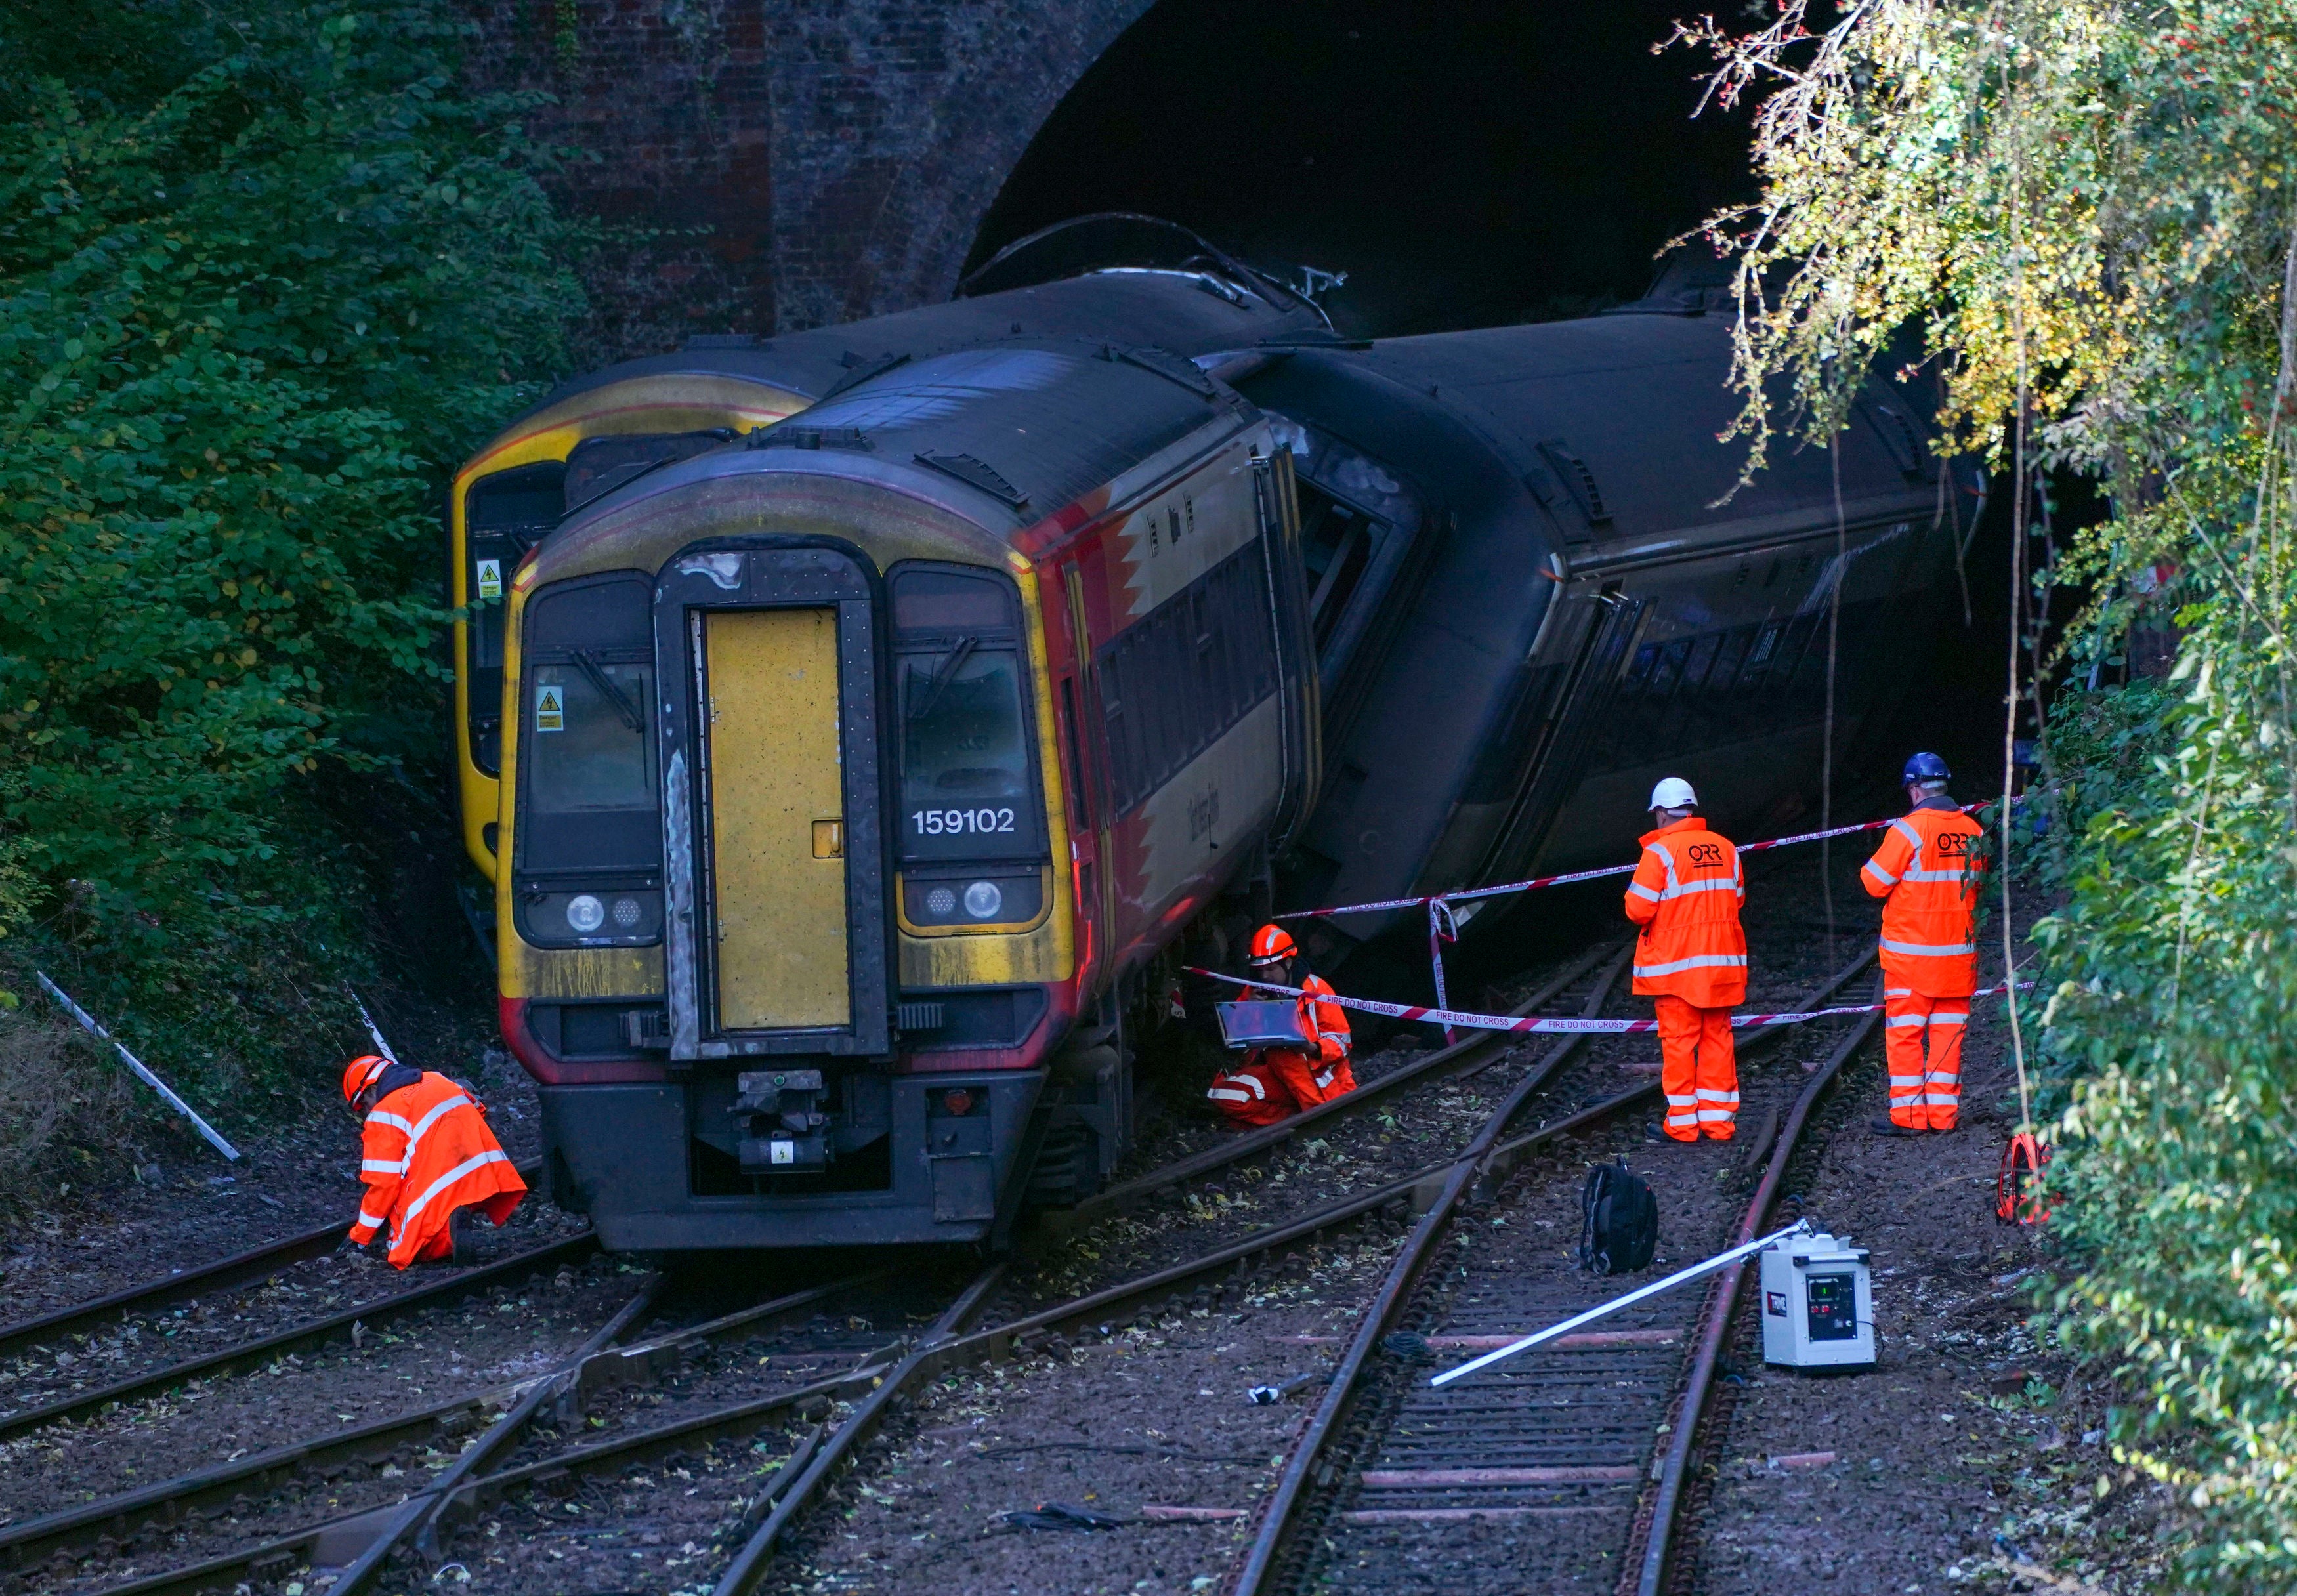 Specialist officers and detectives remain on scene to establish how the trains collided